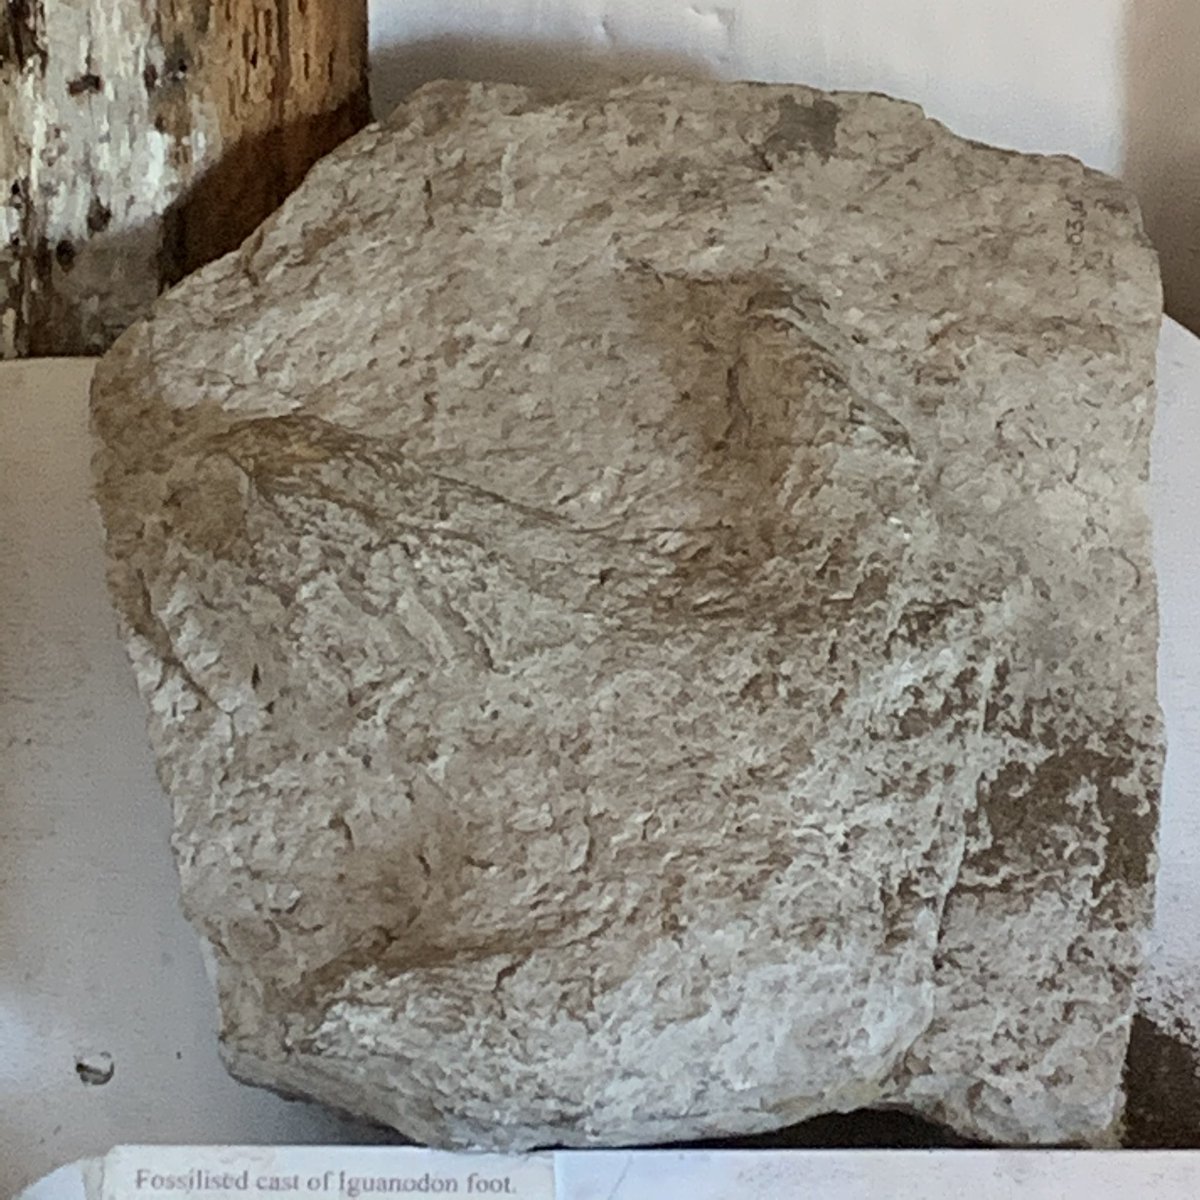 Up in the attic - an even more impressive treasure trove - there is the fossilised cast of an Iguanodon foot. Quite a challenge to get to it...  #SussexTour